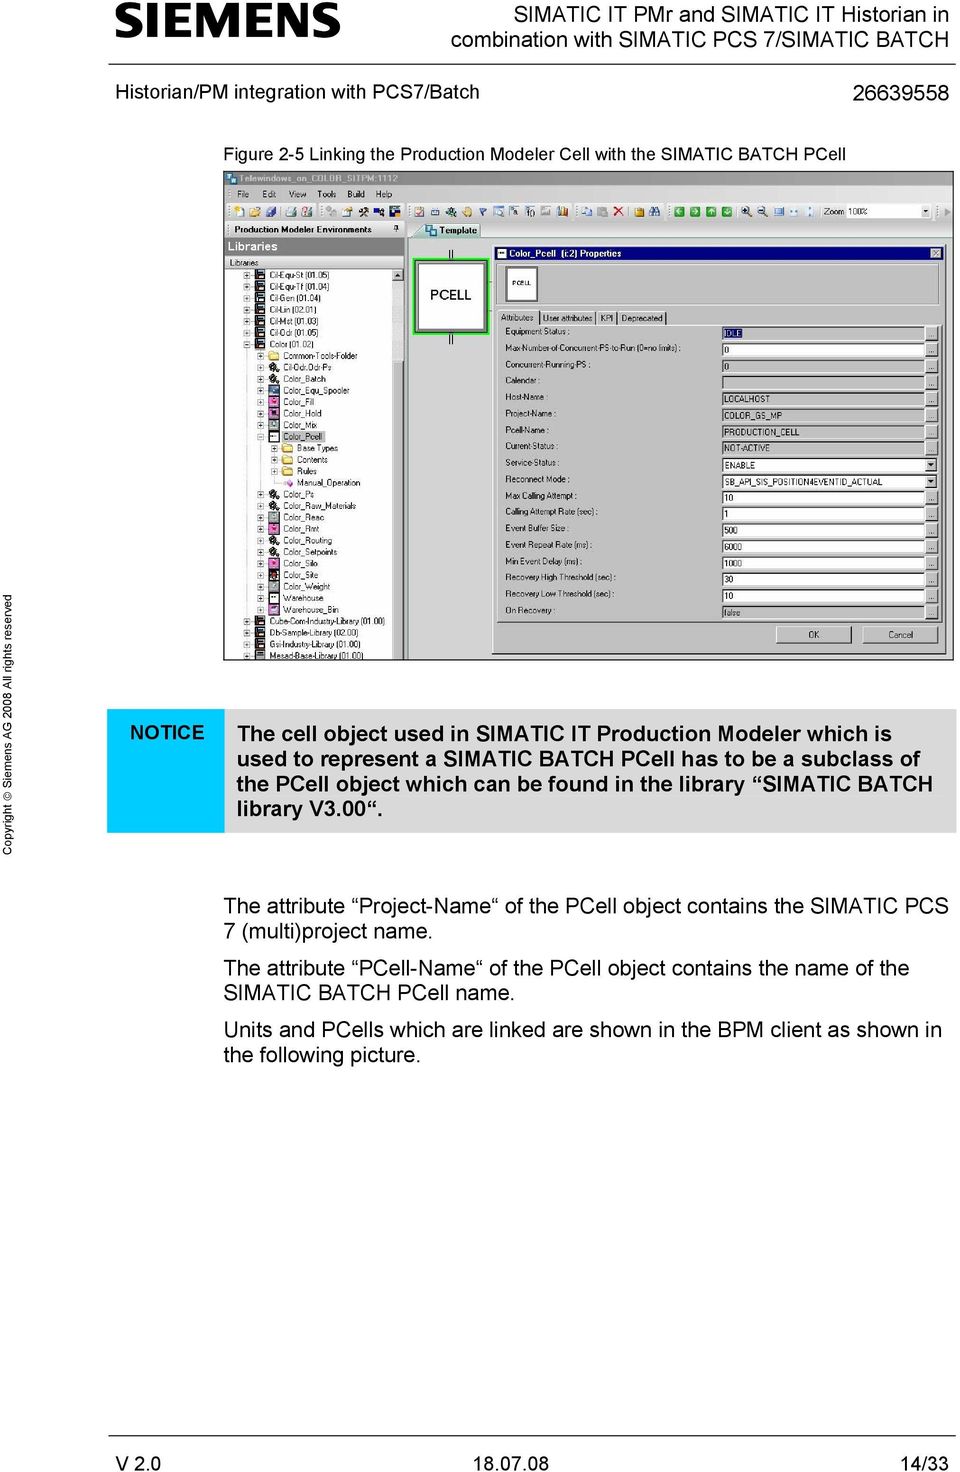 The attribute Project-Name of the PCell object contains the SIMATIC PCS 7 (multi)project name.